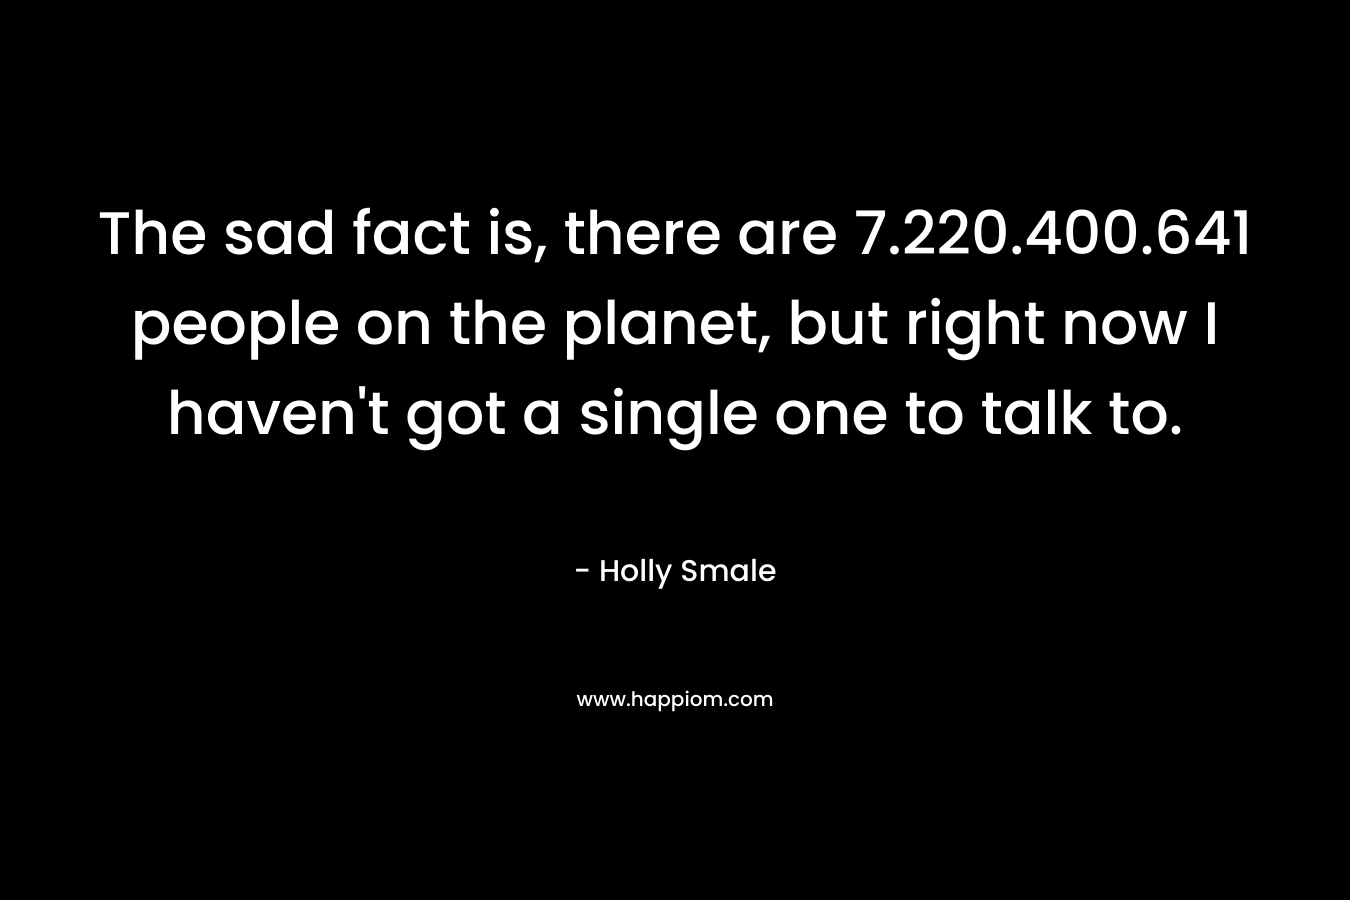 The sad fact is, there are 7.220.400.641 people on the planet, but right now I haven't got a single one to talk to.